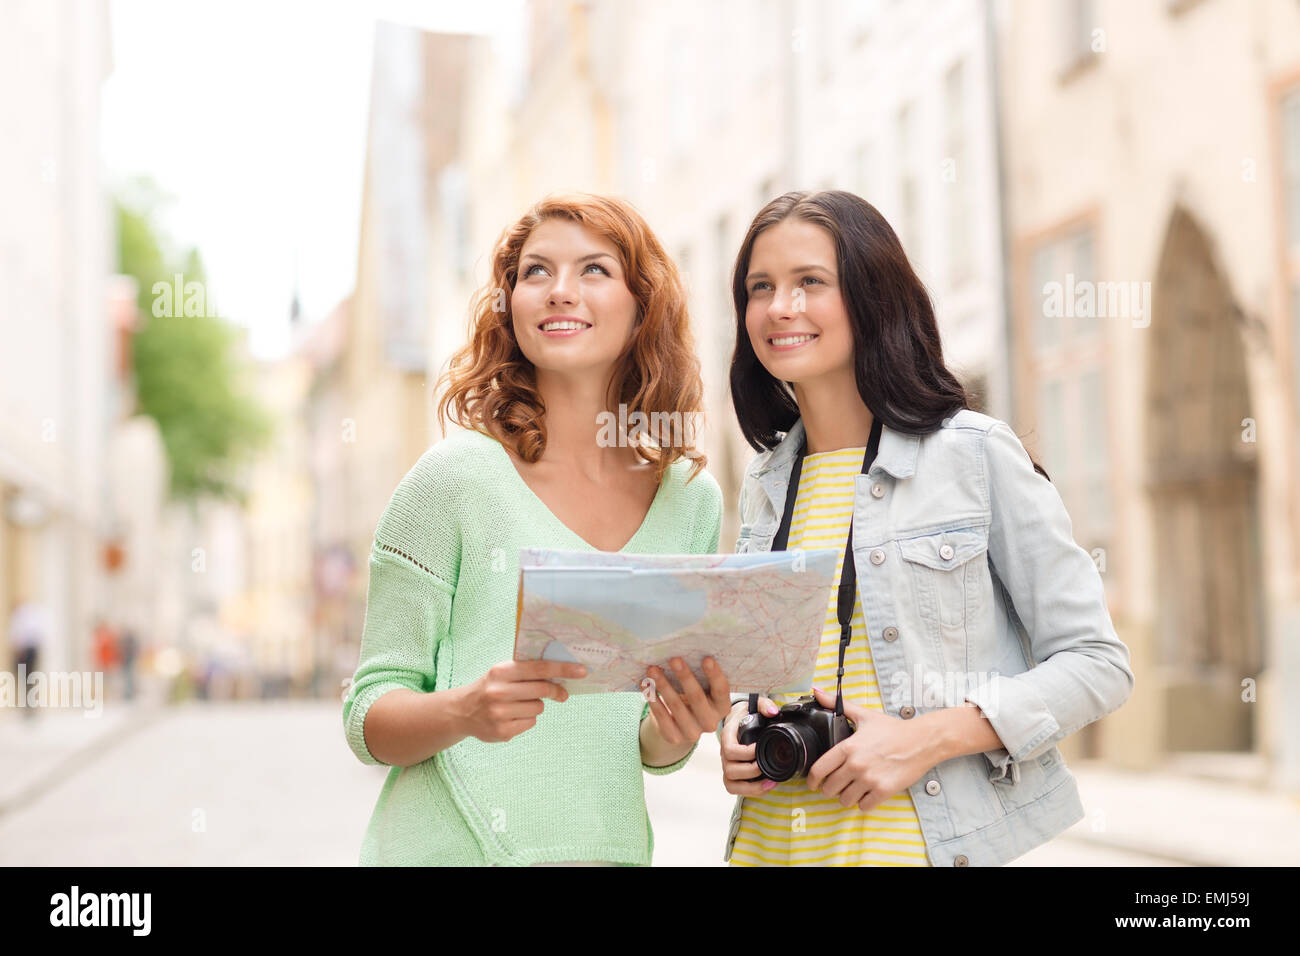 smiling teenage girls with map and camera Stock Photo